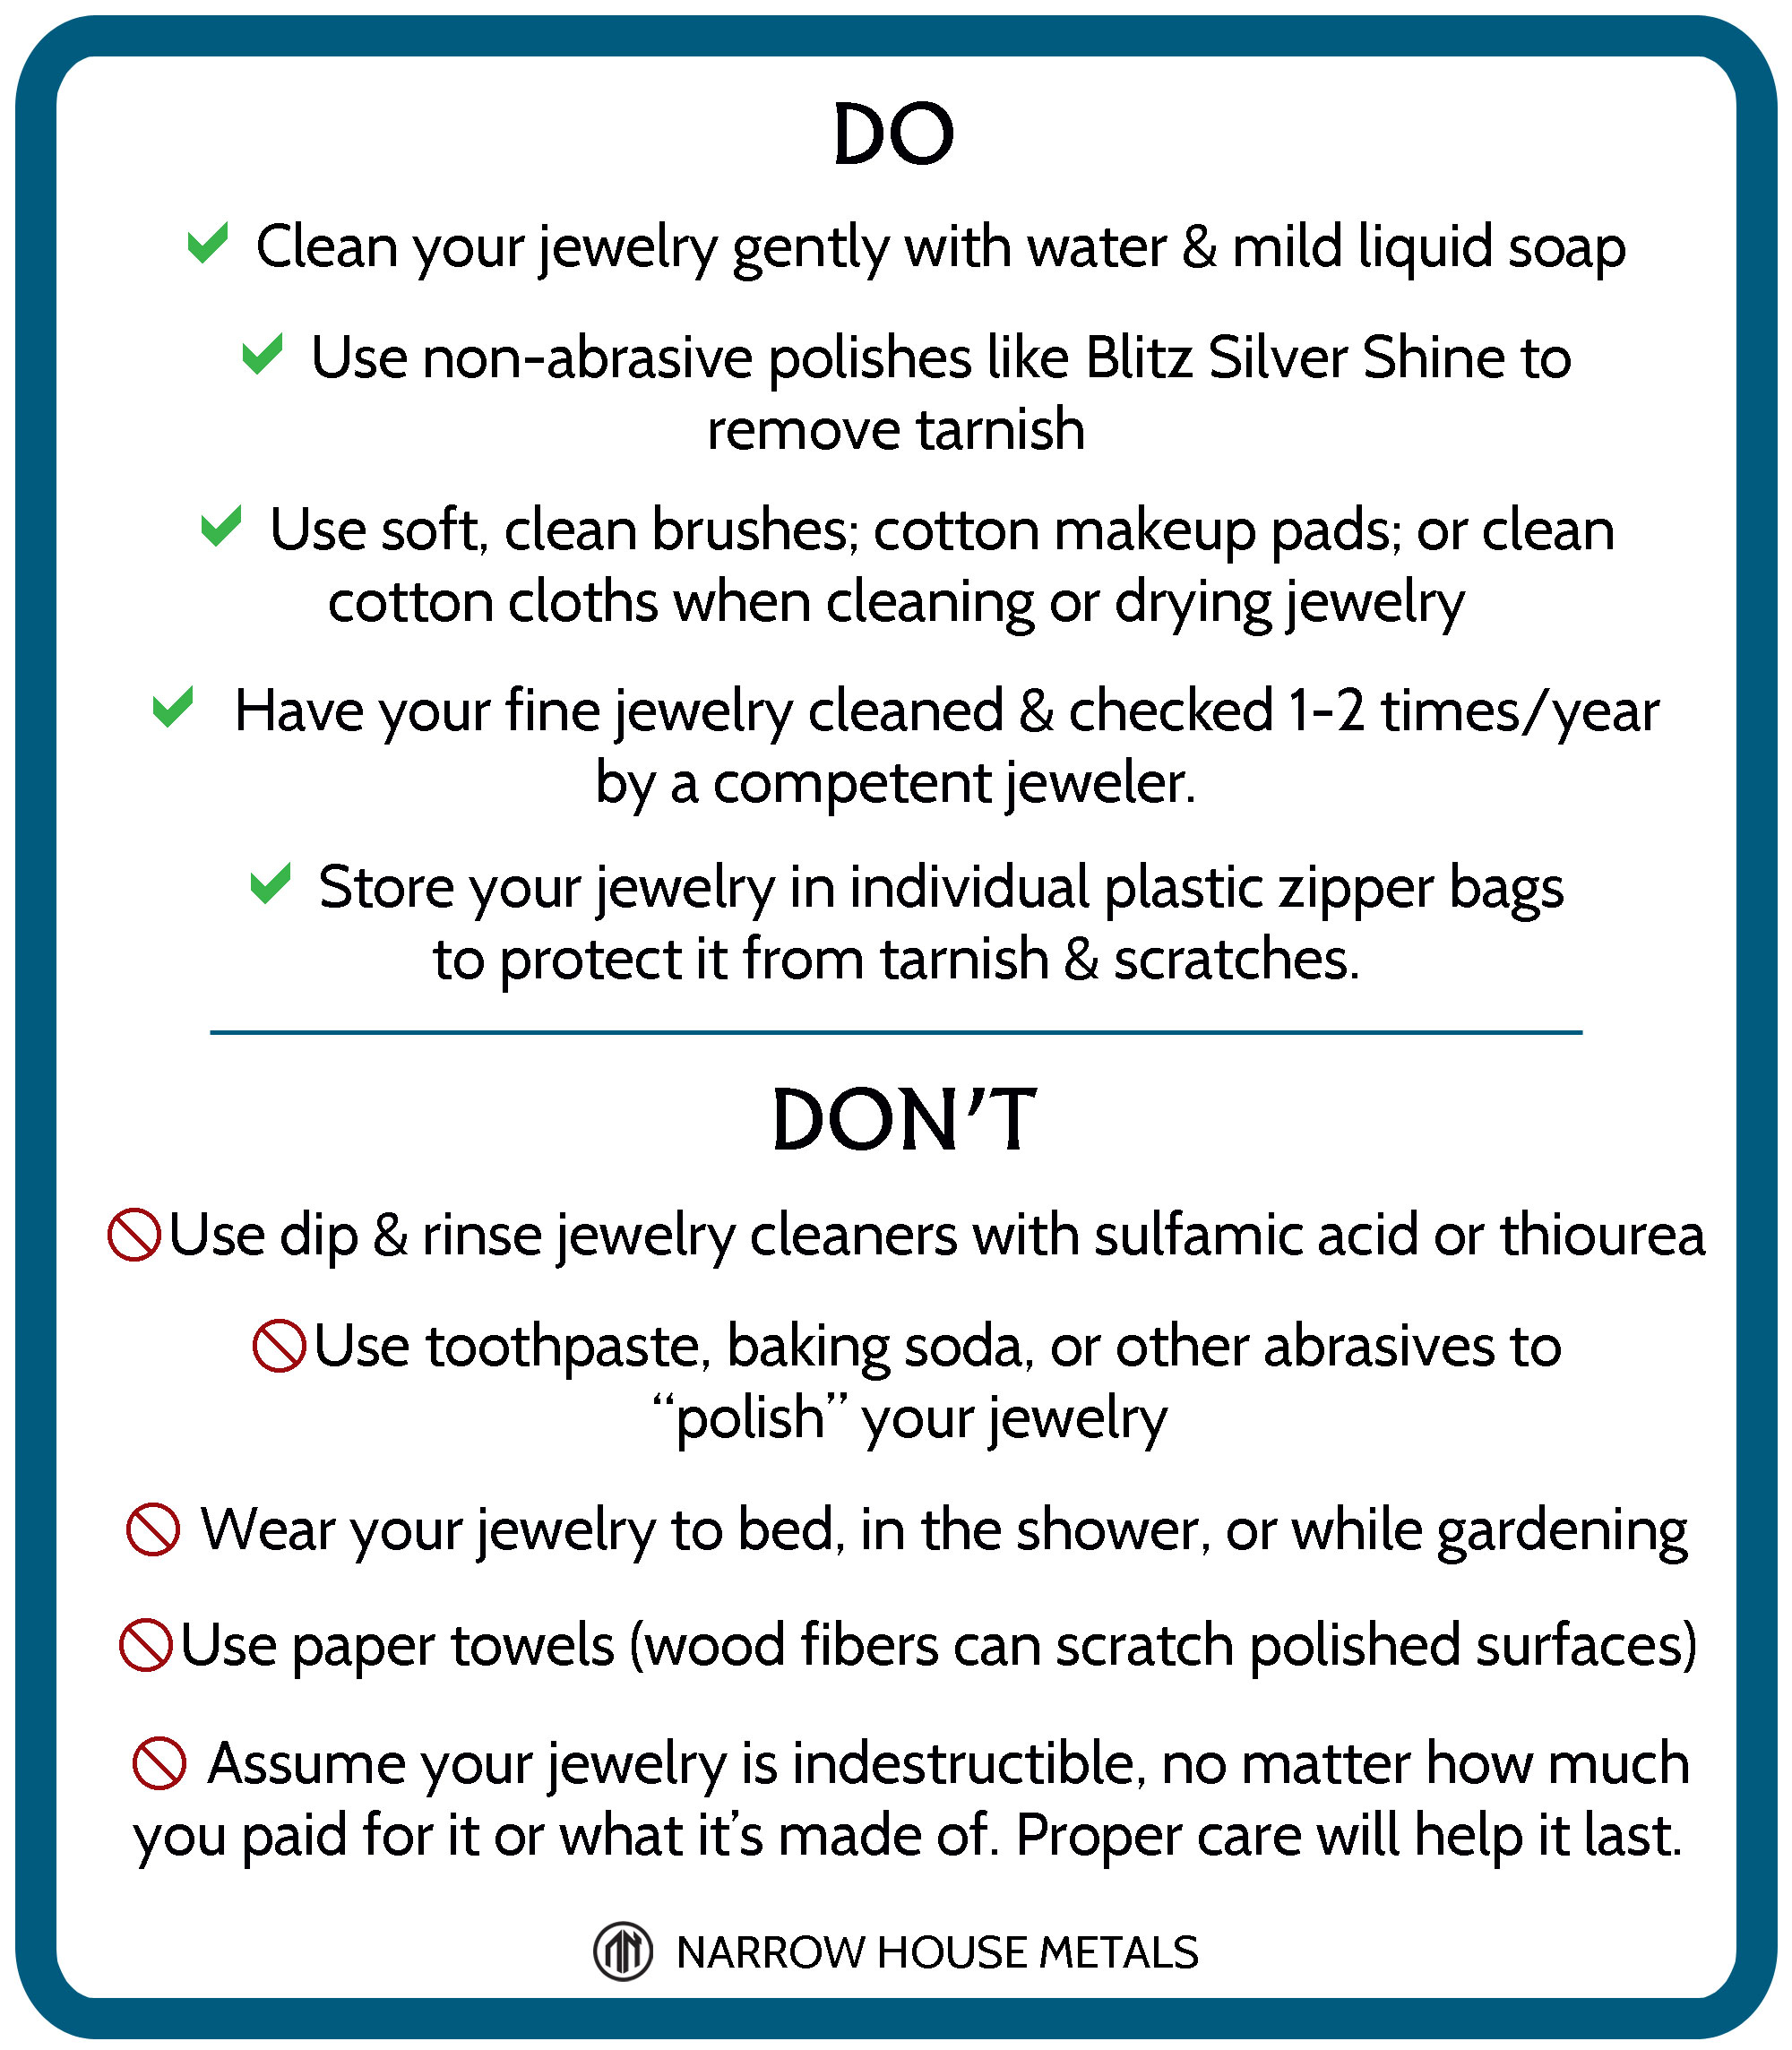 Cleaning your Jewelry 